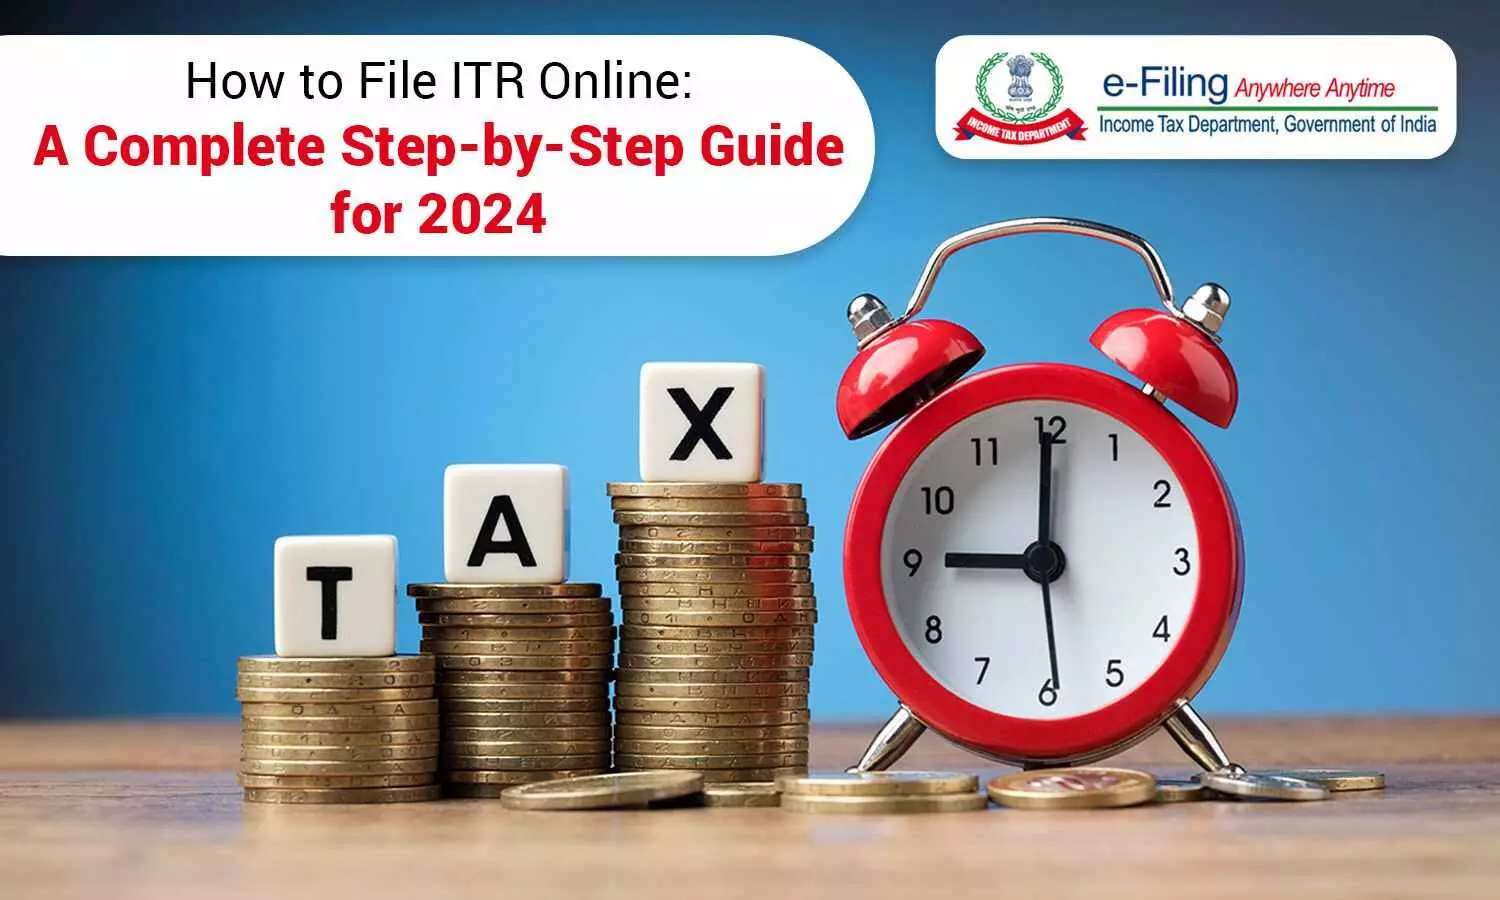 How to File ITR Online: A Complete Step-by-Step Guide for 2024